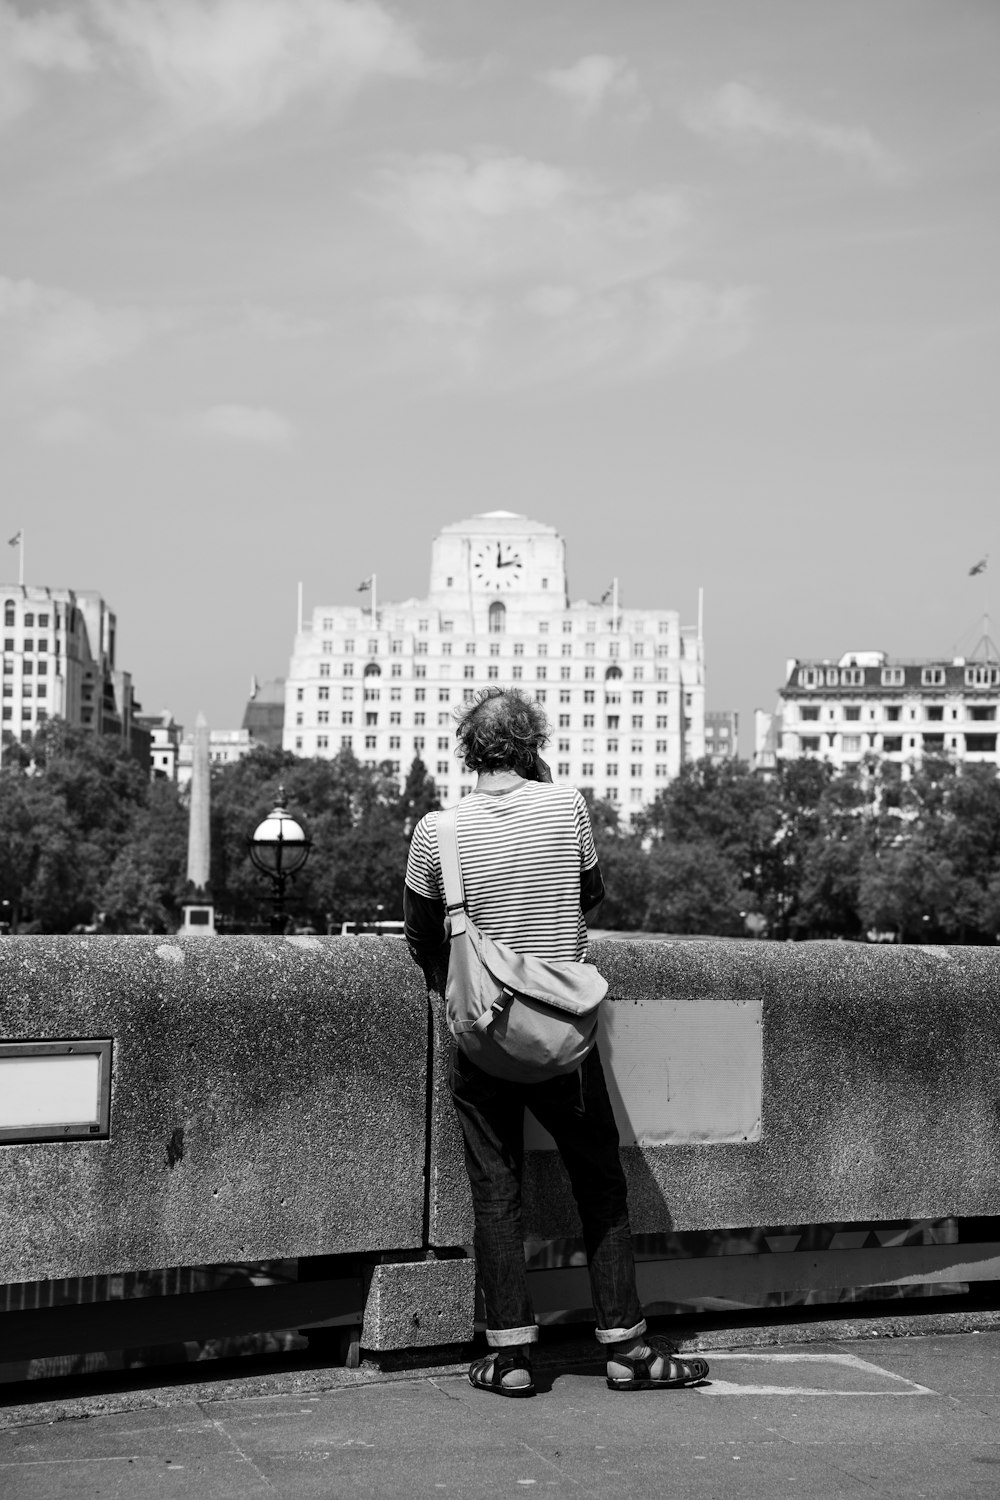 a person sitting on a bench looking at the city